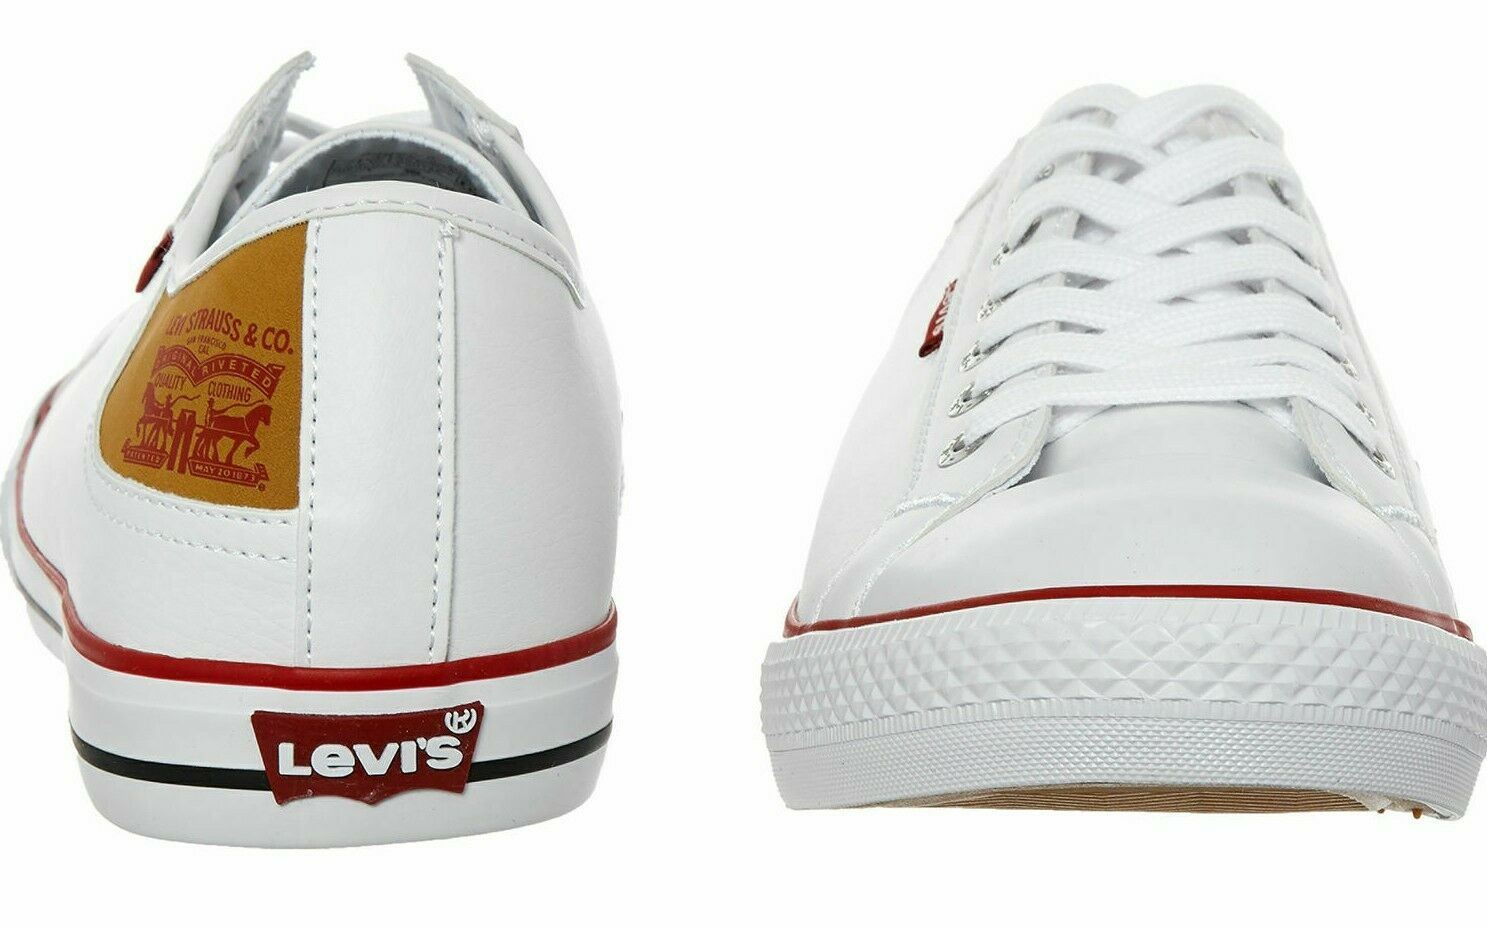 LEVI'S Men's STAN BUCK Faux Leather Trainers, White & Red, UK 9 EU 43